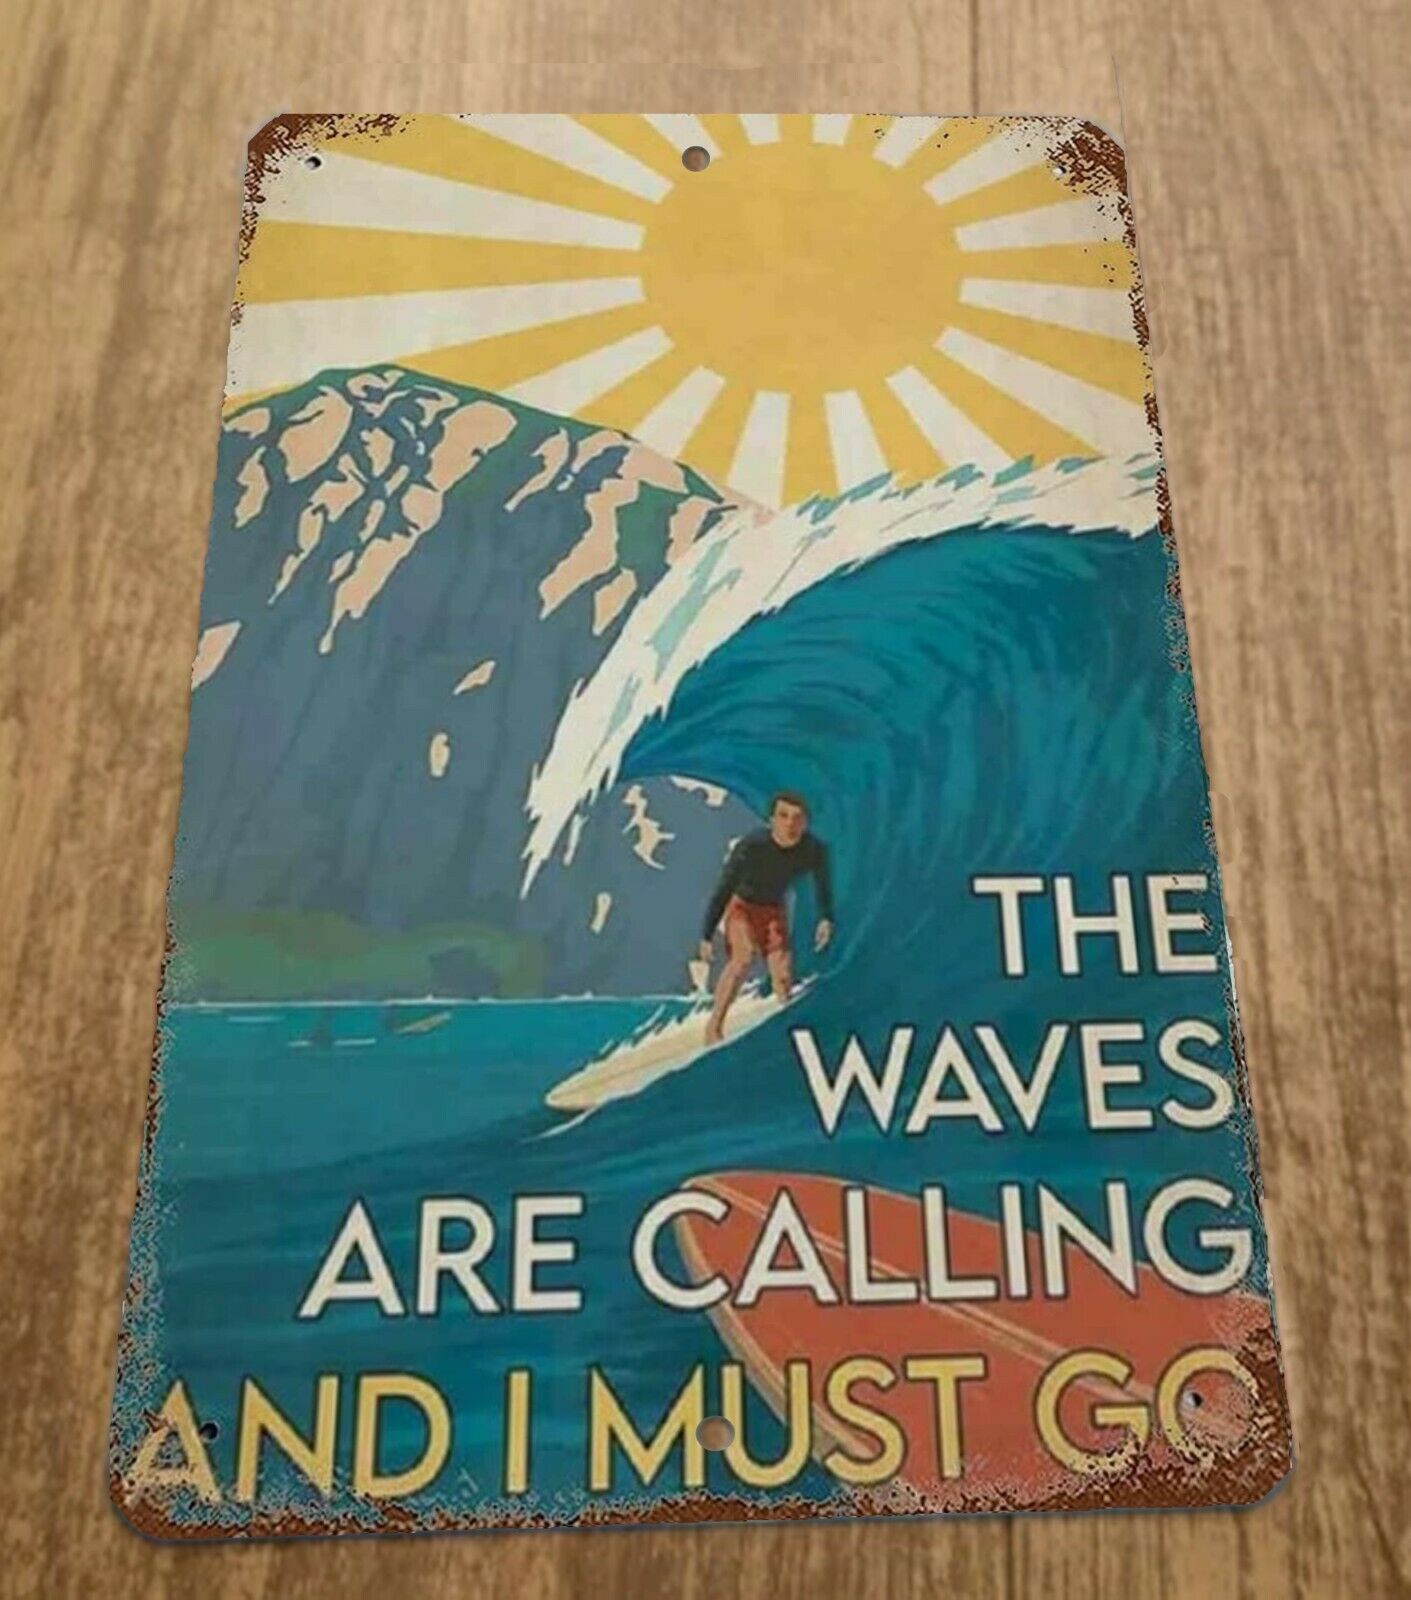 Surfing The Waves Are Calling and I must Go 8x12 Metal Wall Sign